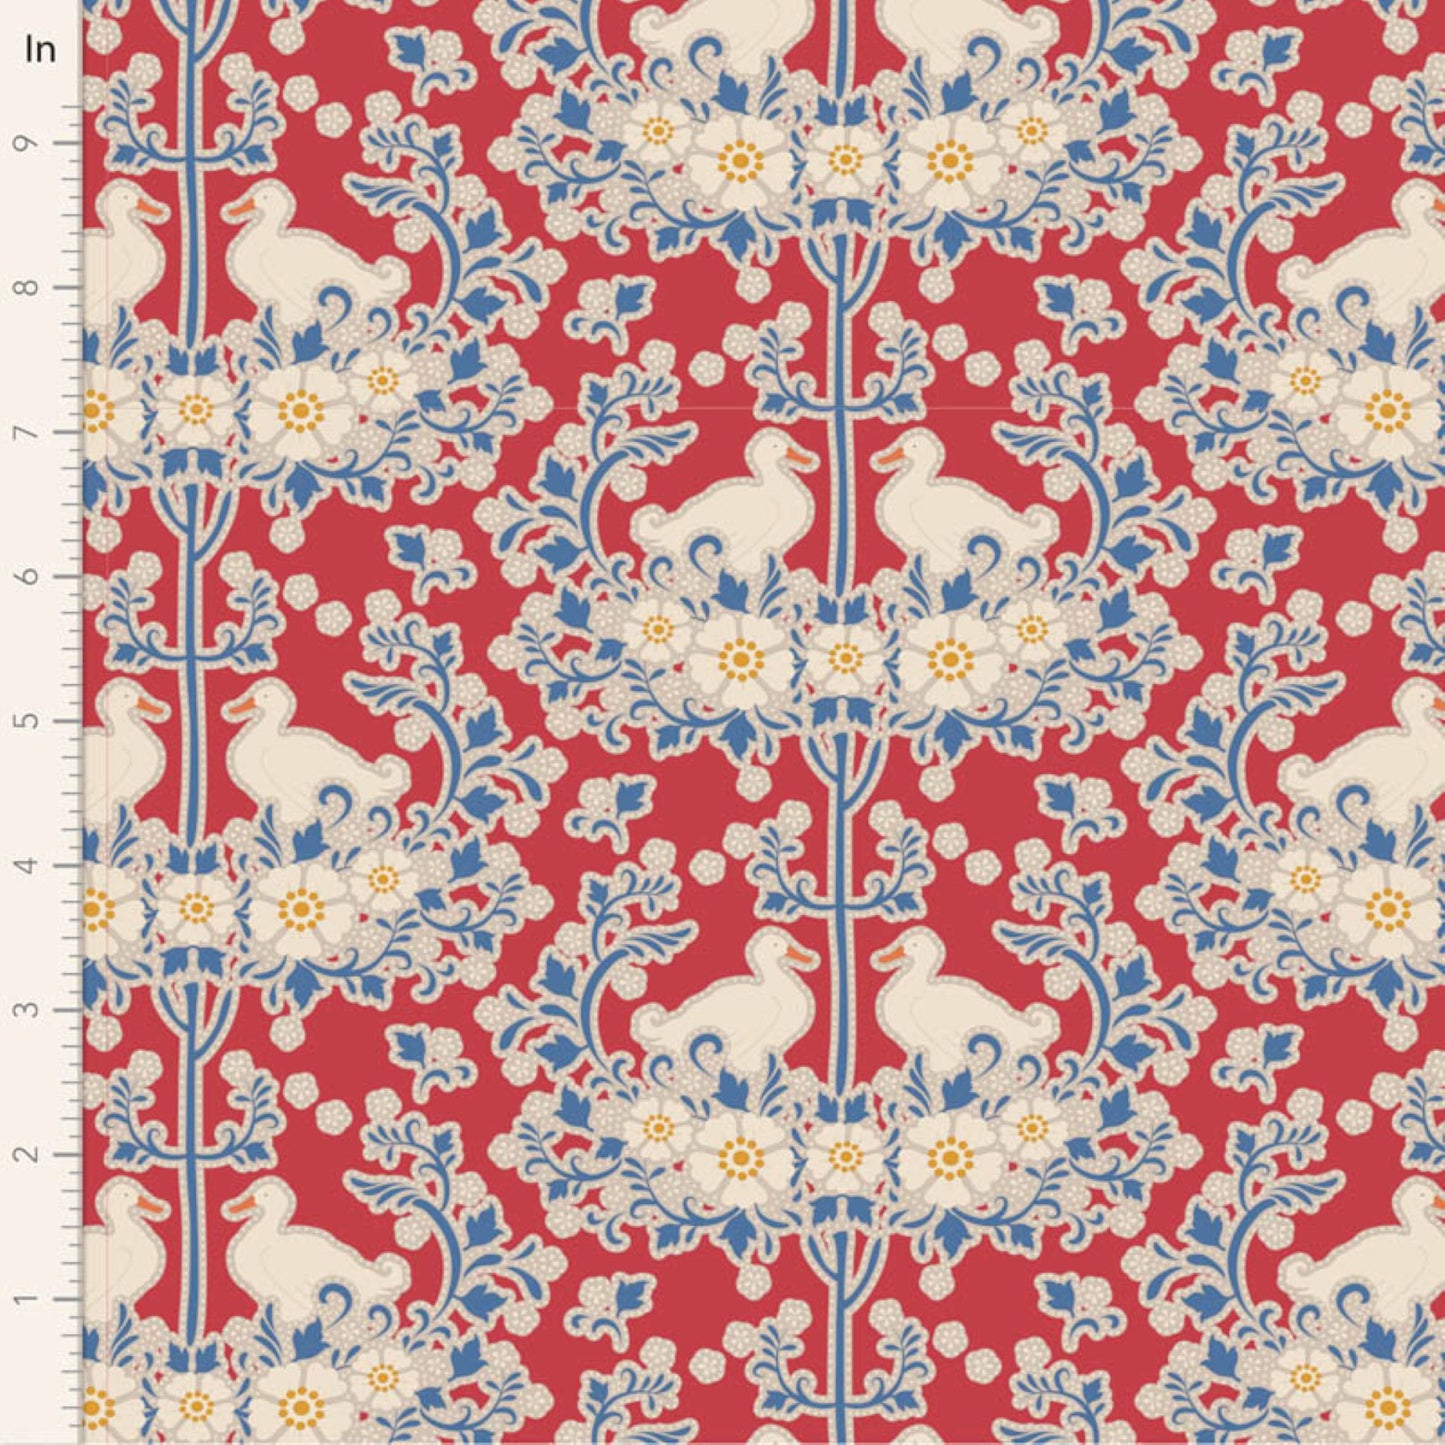 Tilda Jubilee Duck Nest red floral cotton quilt fabric by the FQ + More